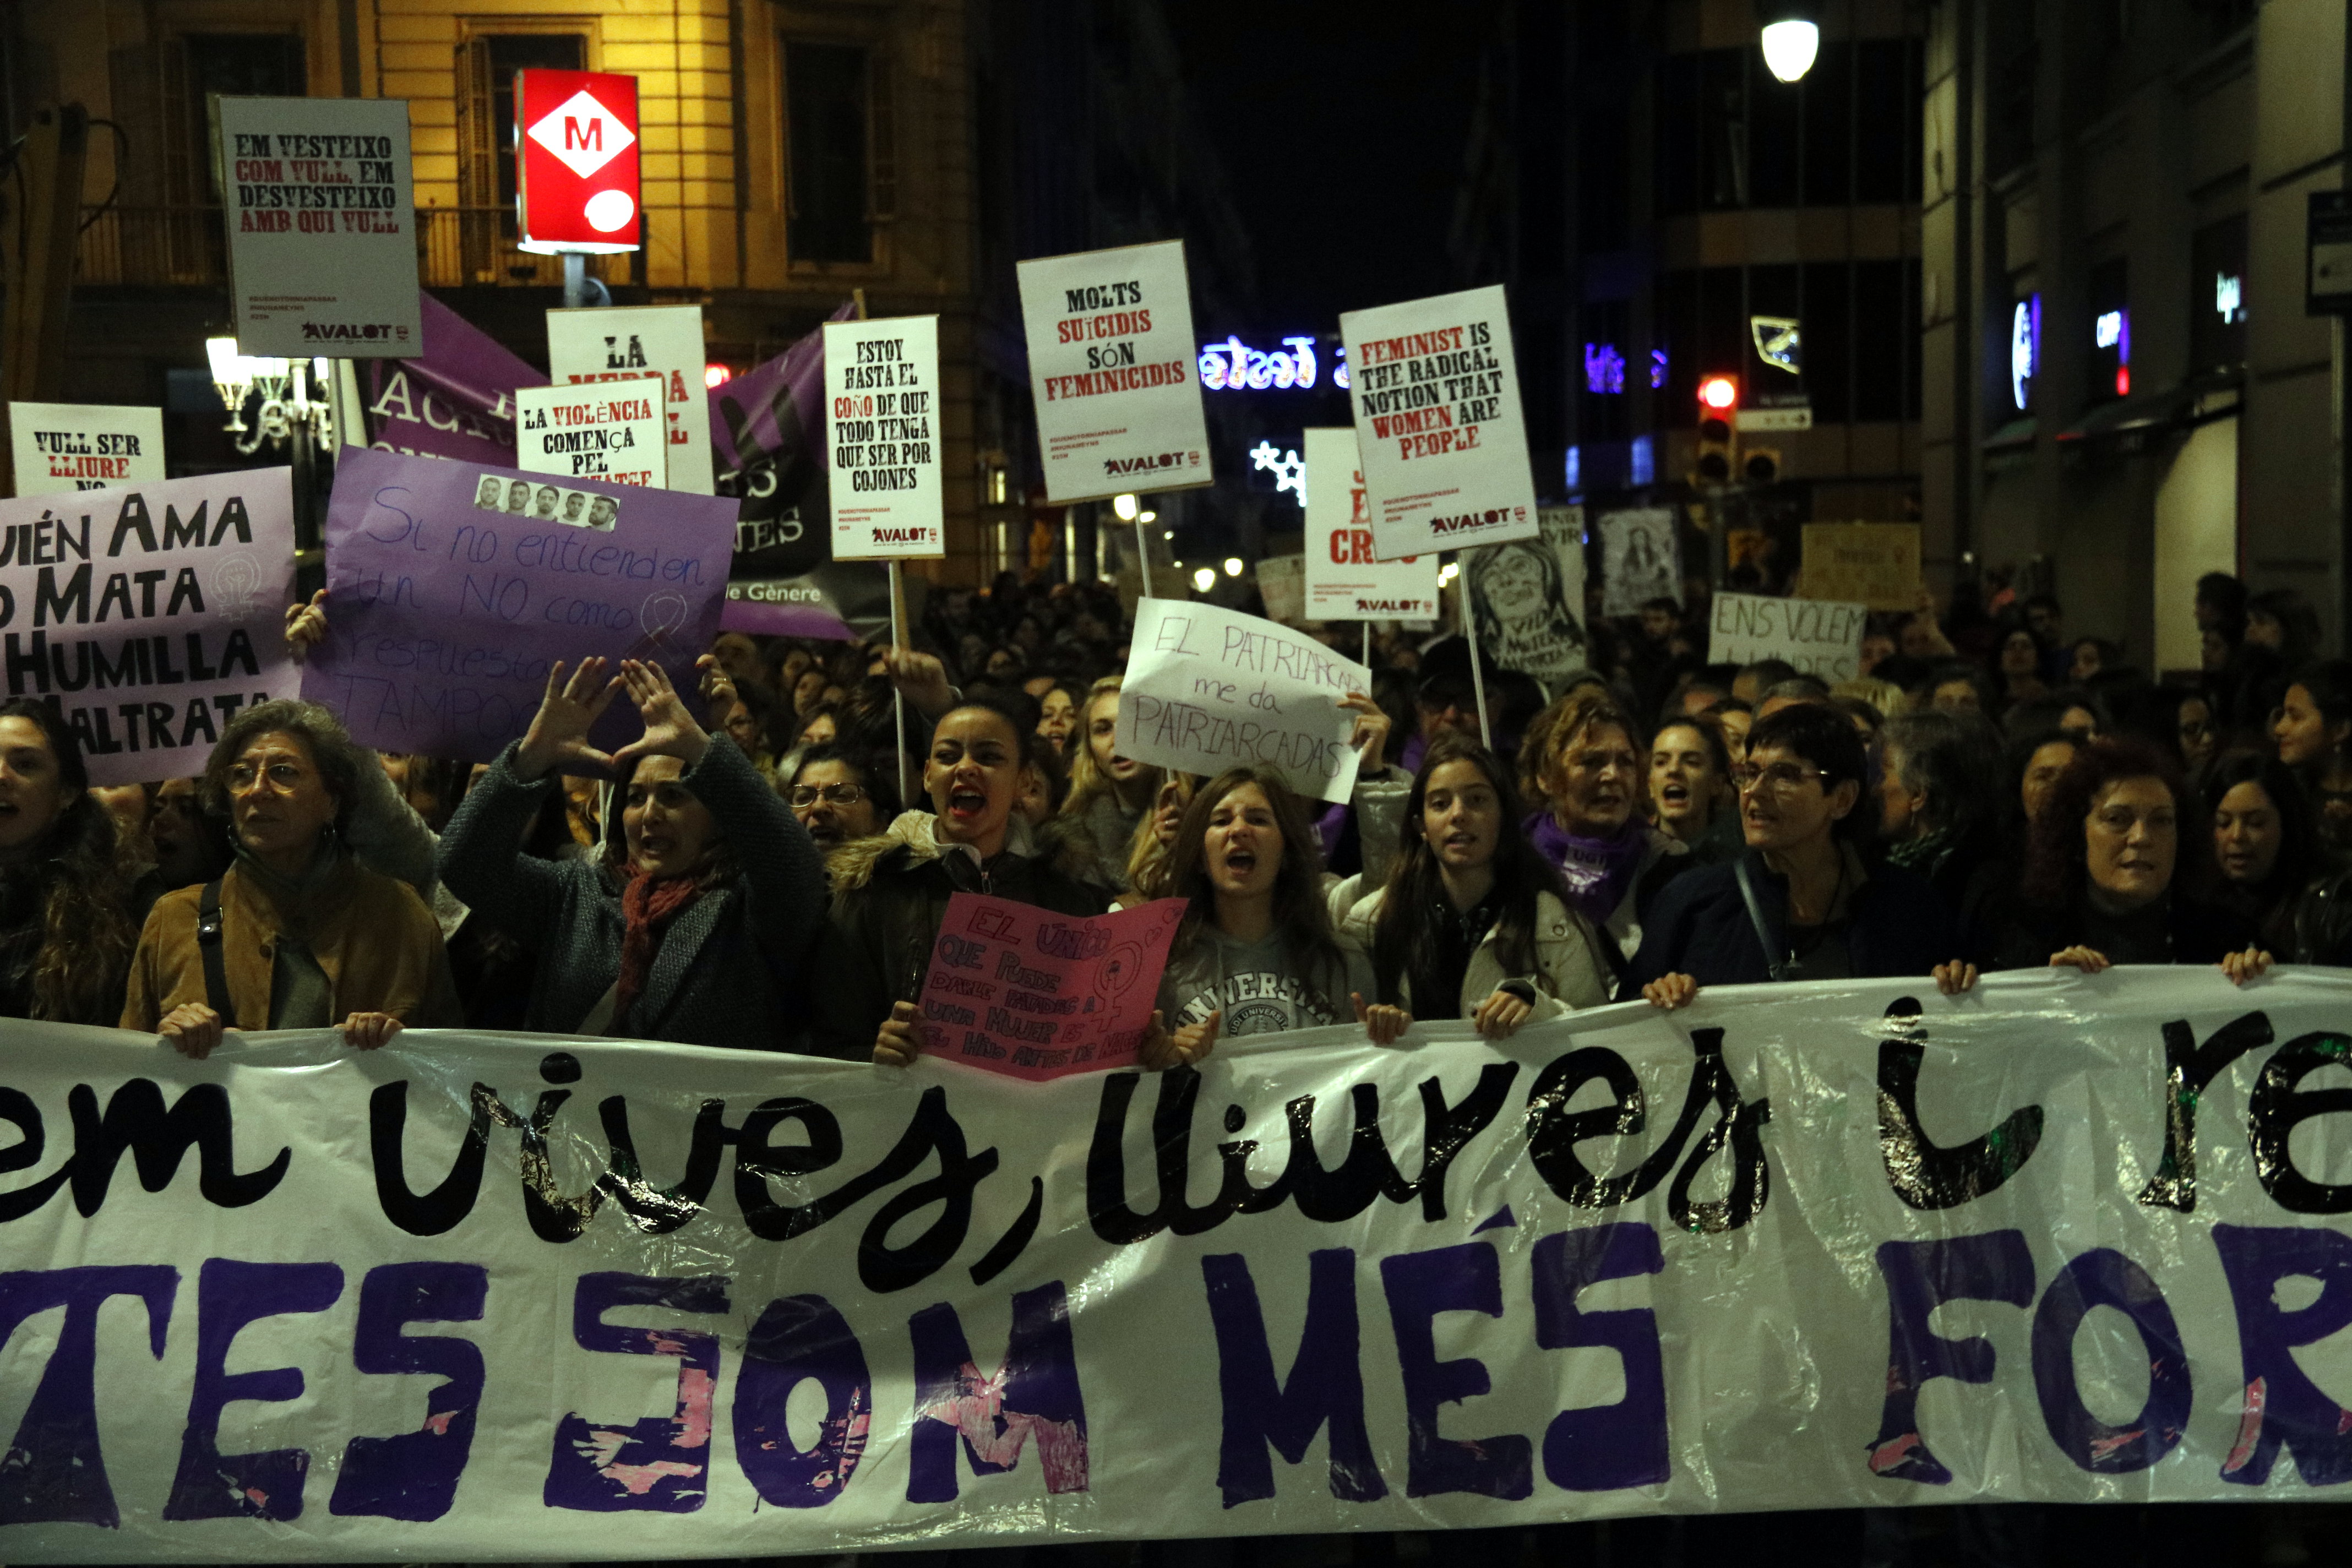 Protesters marching against gender violence in Barcelona on 25 November (by ACN)